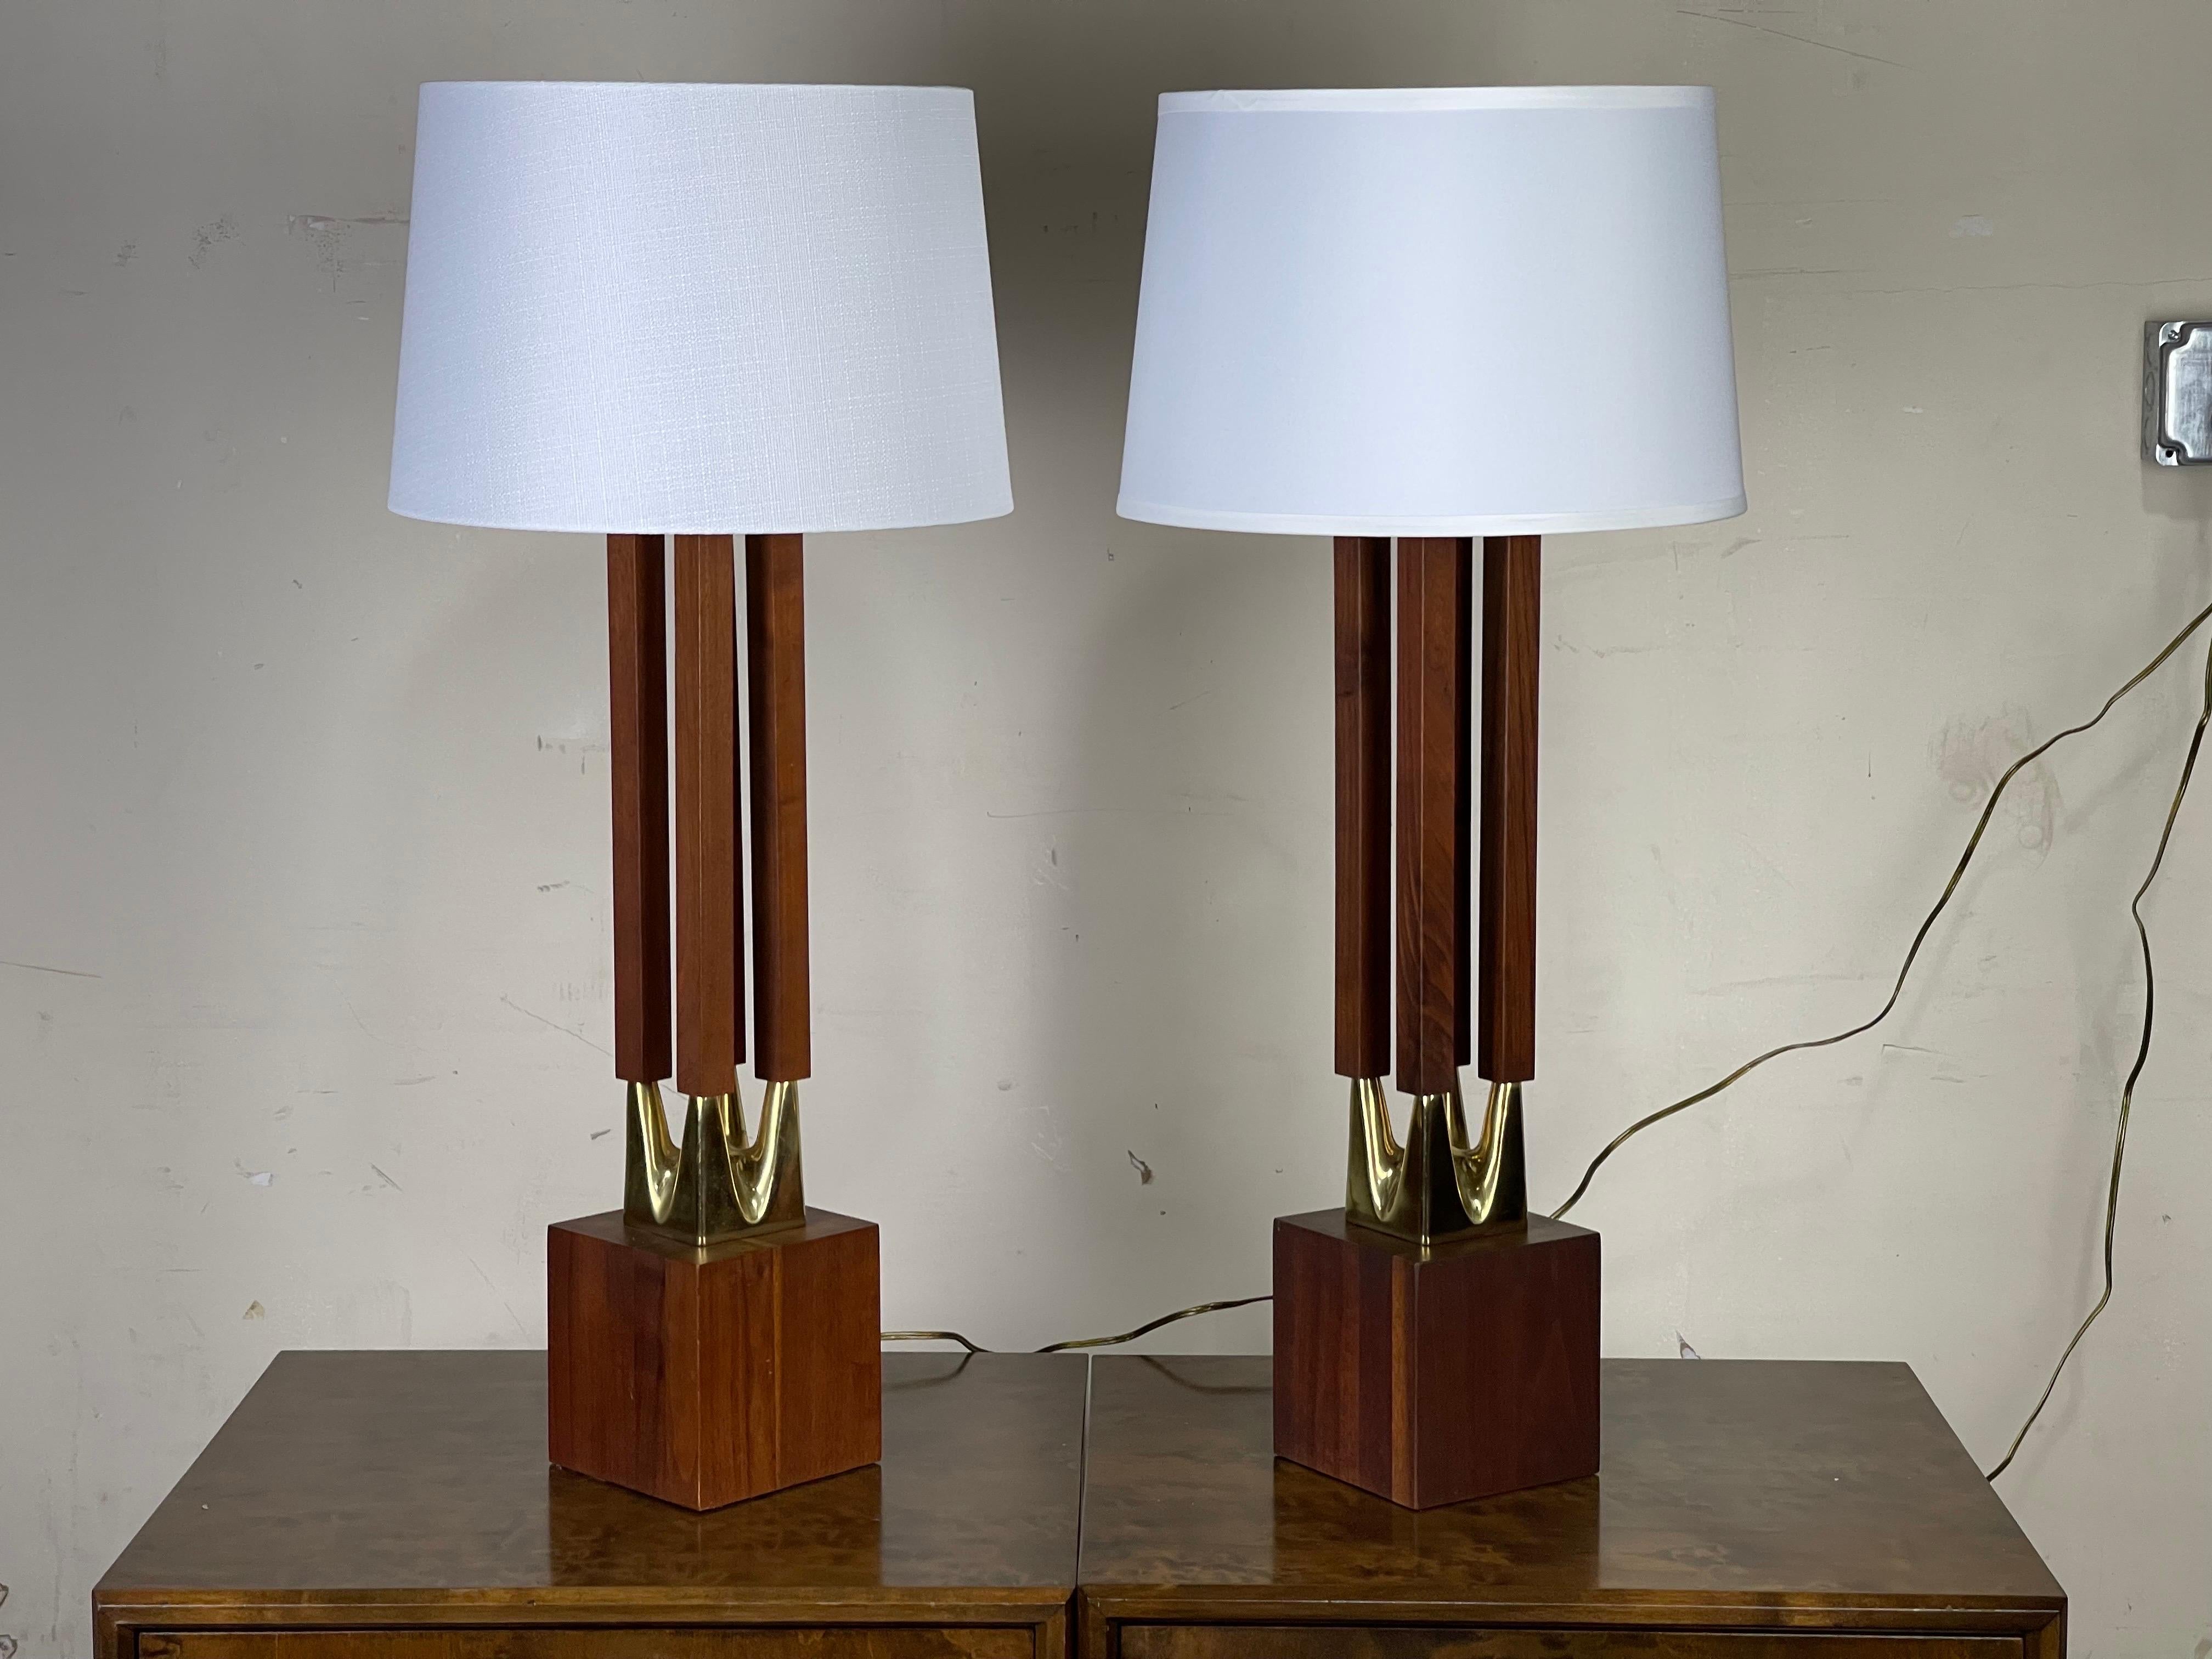 Striking large midcentury columned walnut and brass table lamps by Laurel Lamp Co. Some light spotting/oxidation to brass. See pictures. 
Measures: Lamps: 33.75